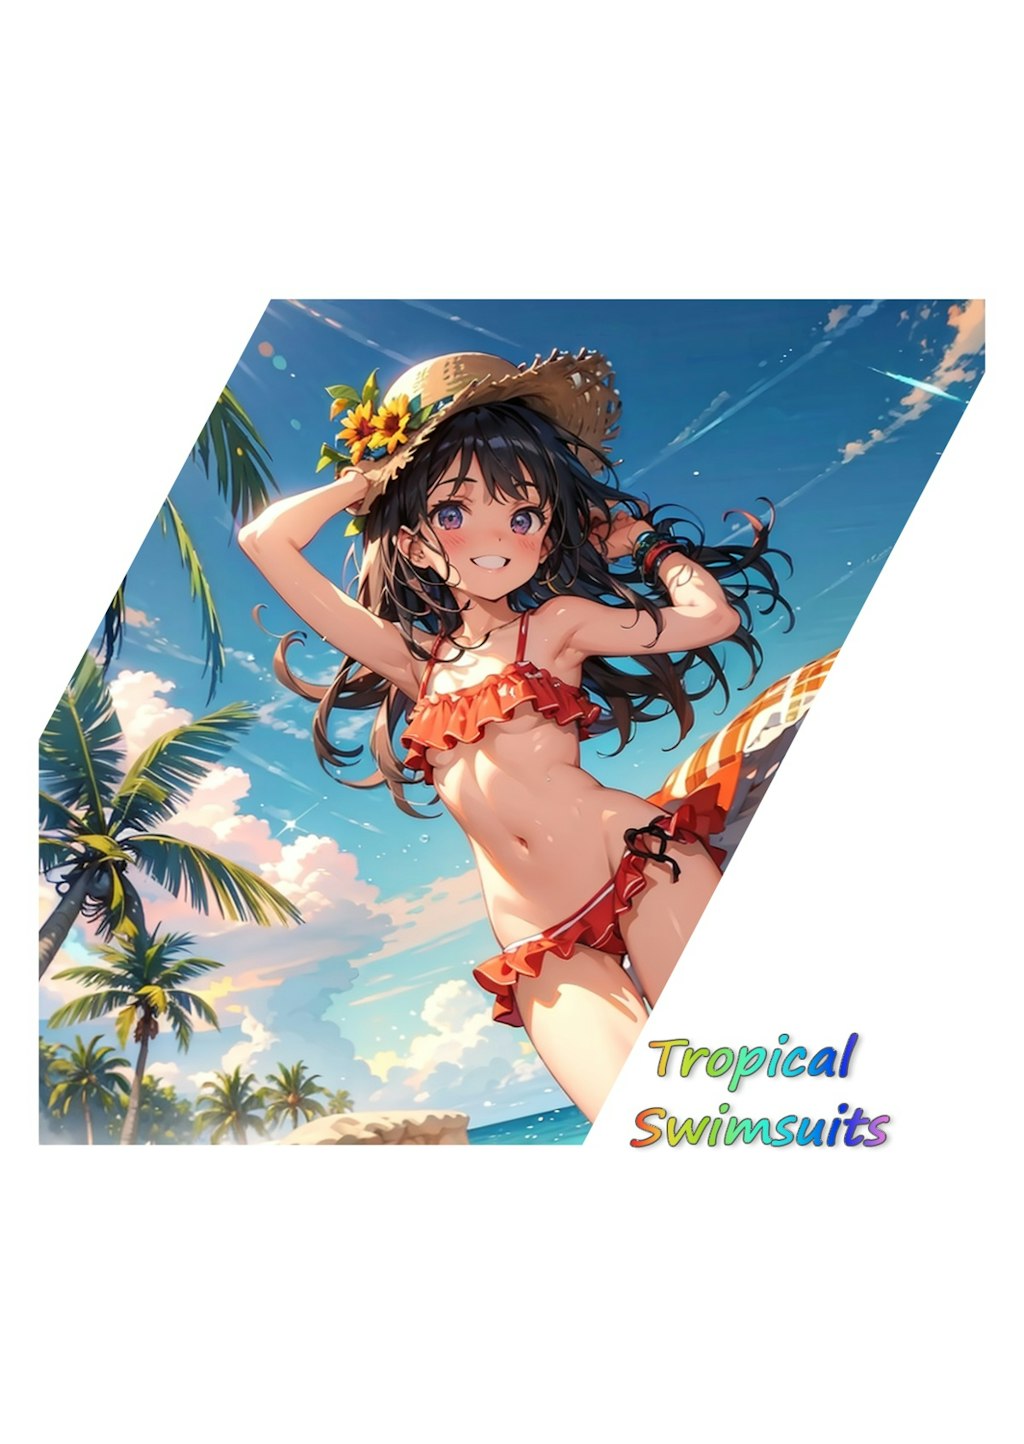 Tropical Swimsuits No.6 Final